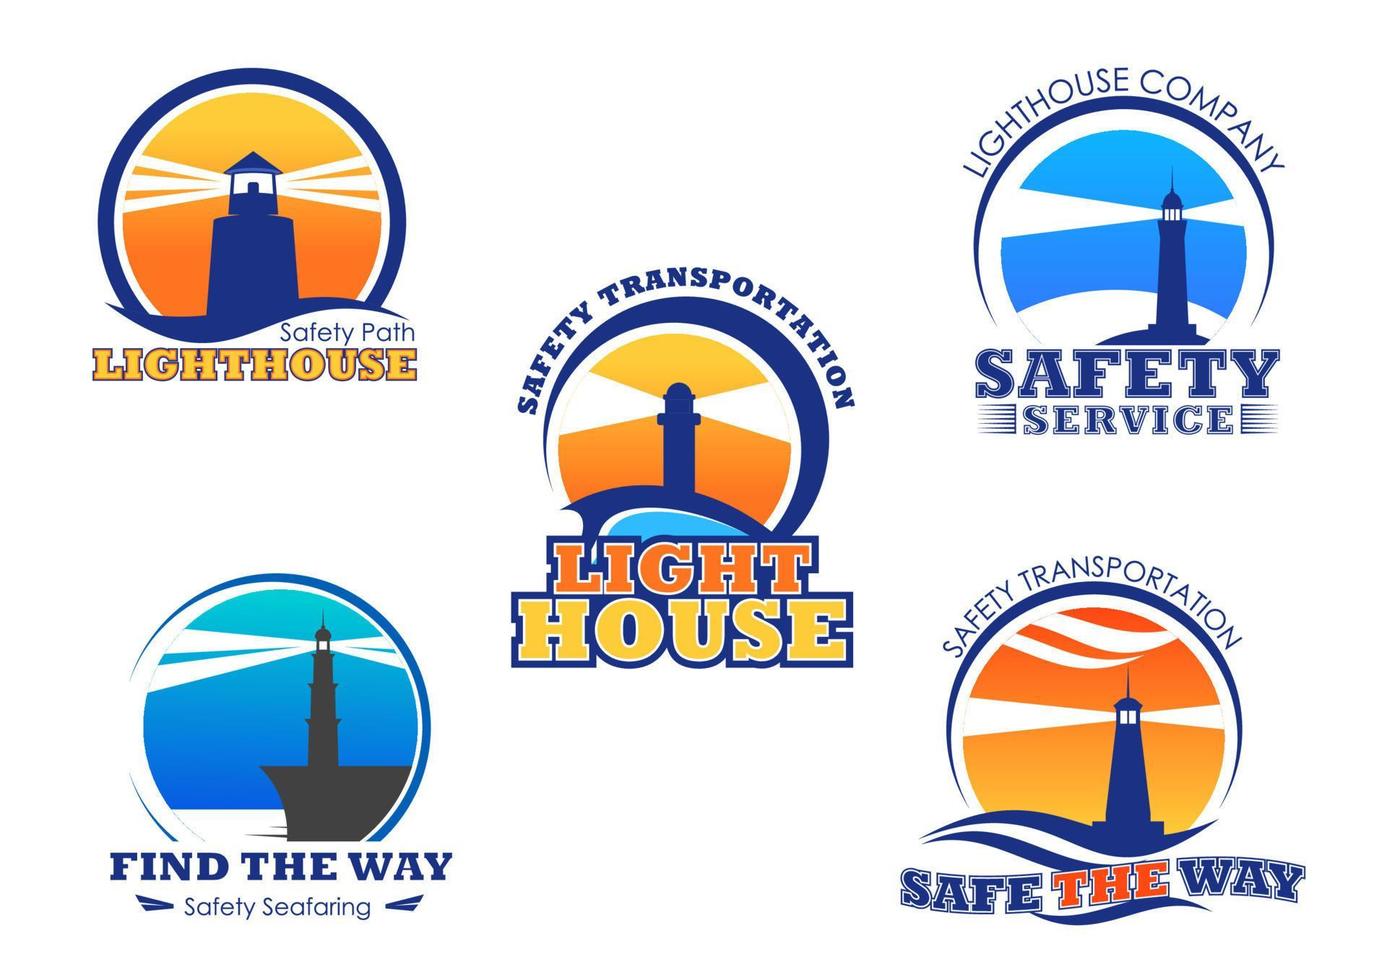 Lighthouse or beacon vector isolated icons set